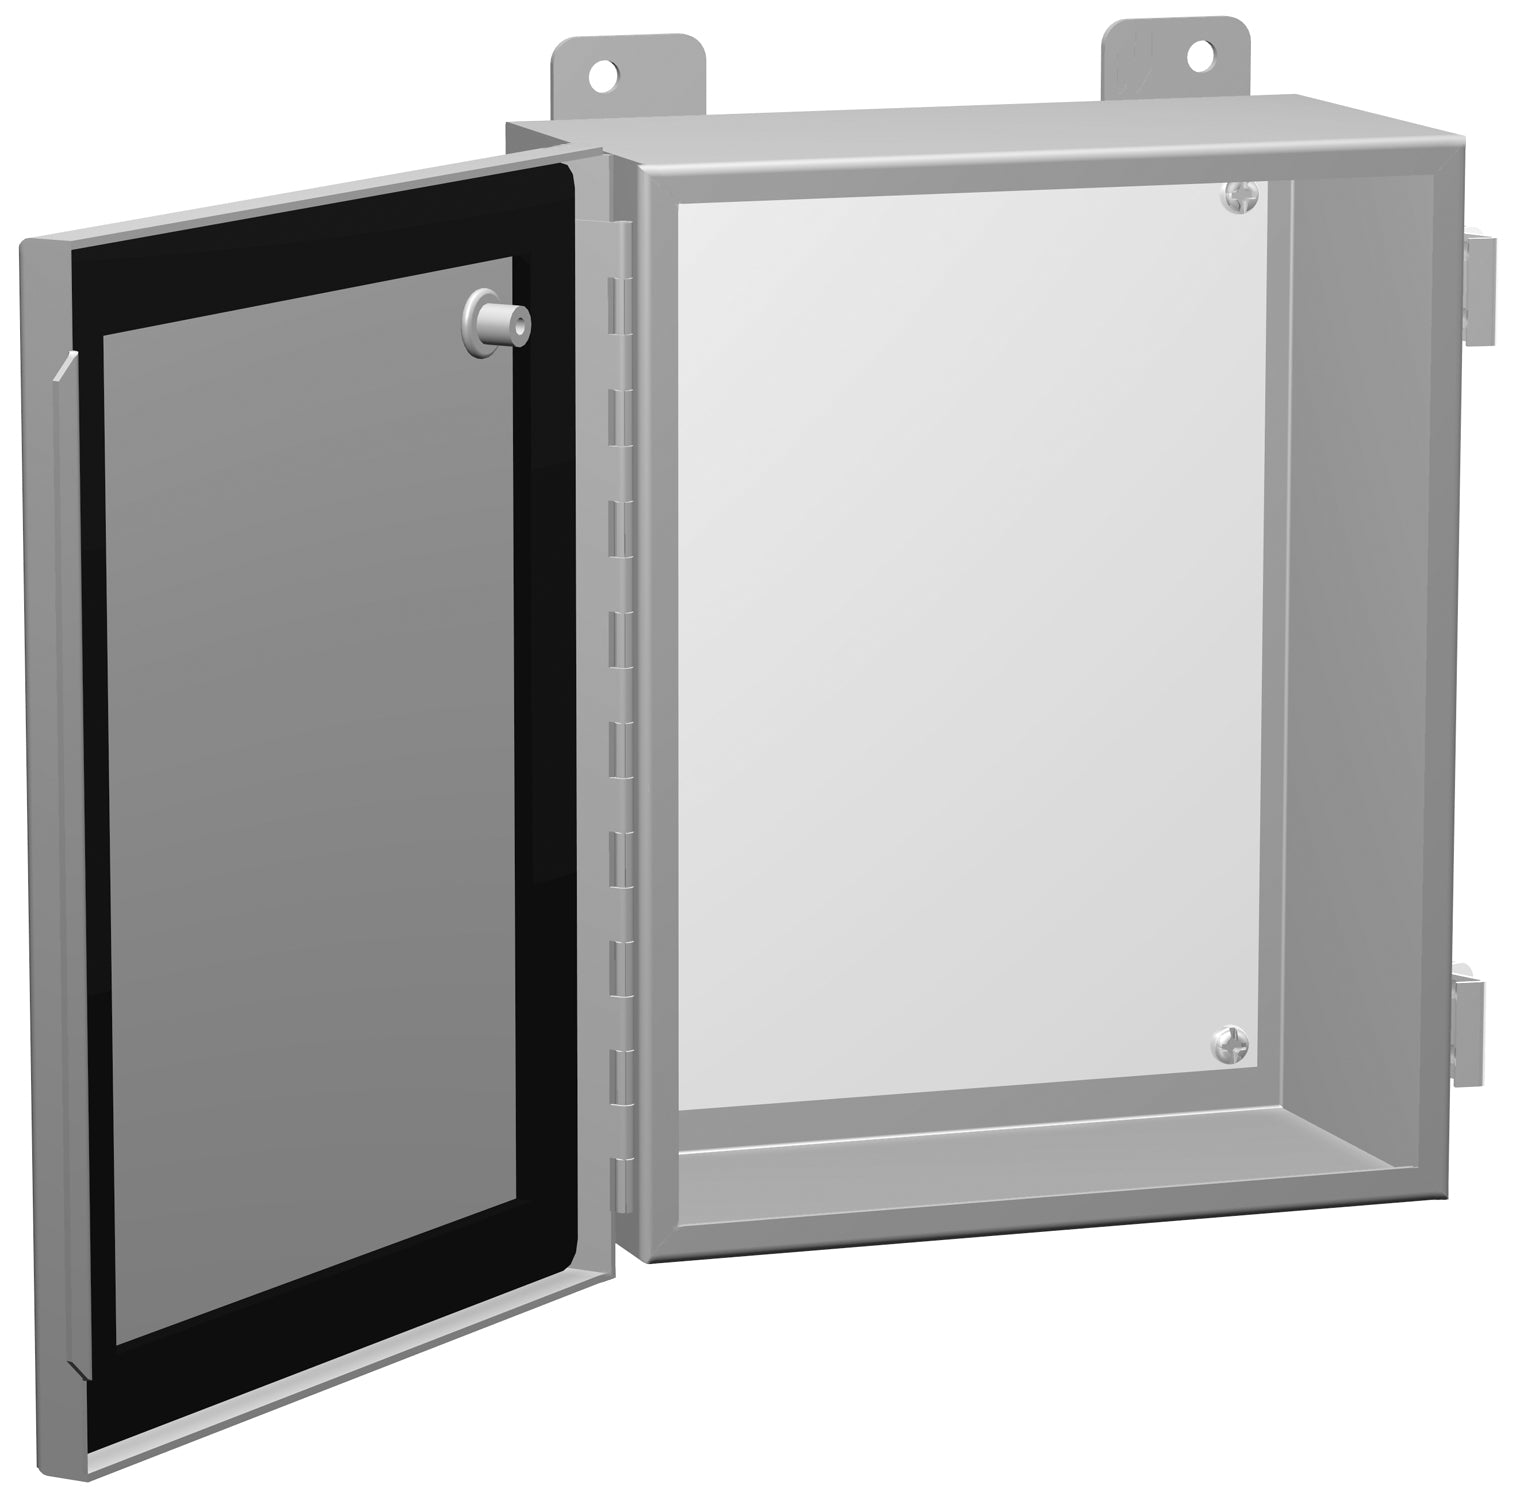 1418 N4 Series Painted Mild Steel Enclosures with Continuously Hinged Clamped Cover Includes Inner Mounting Panel